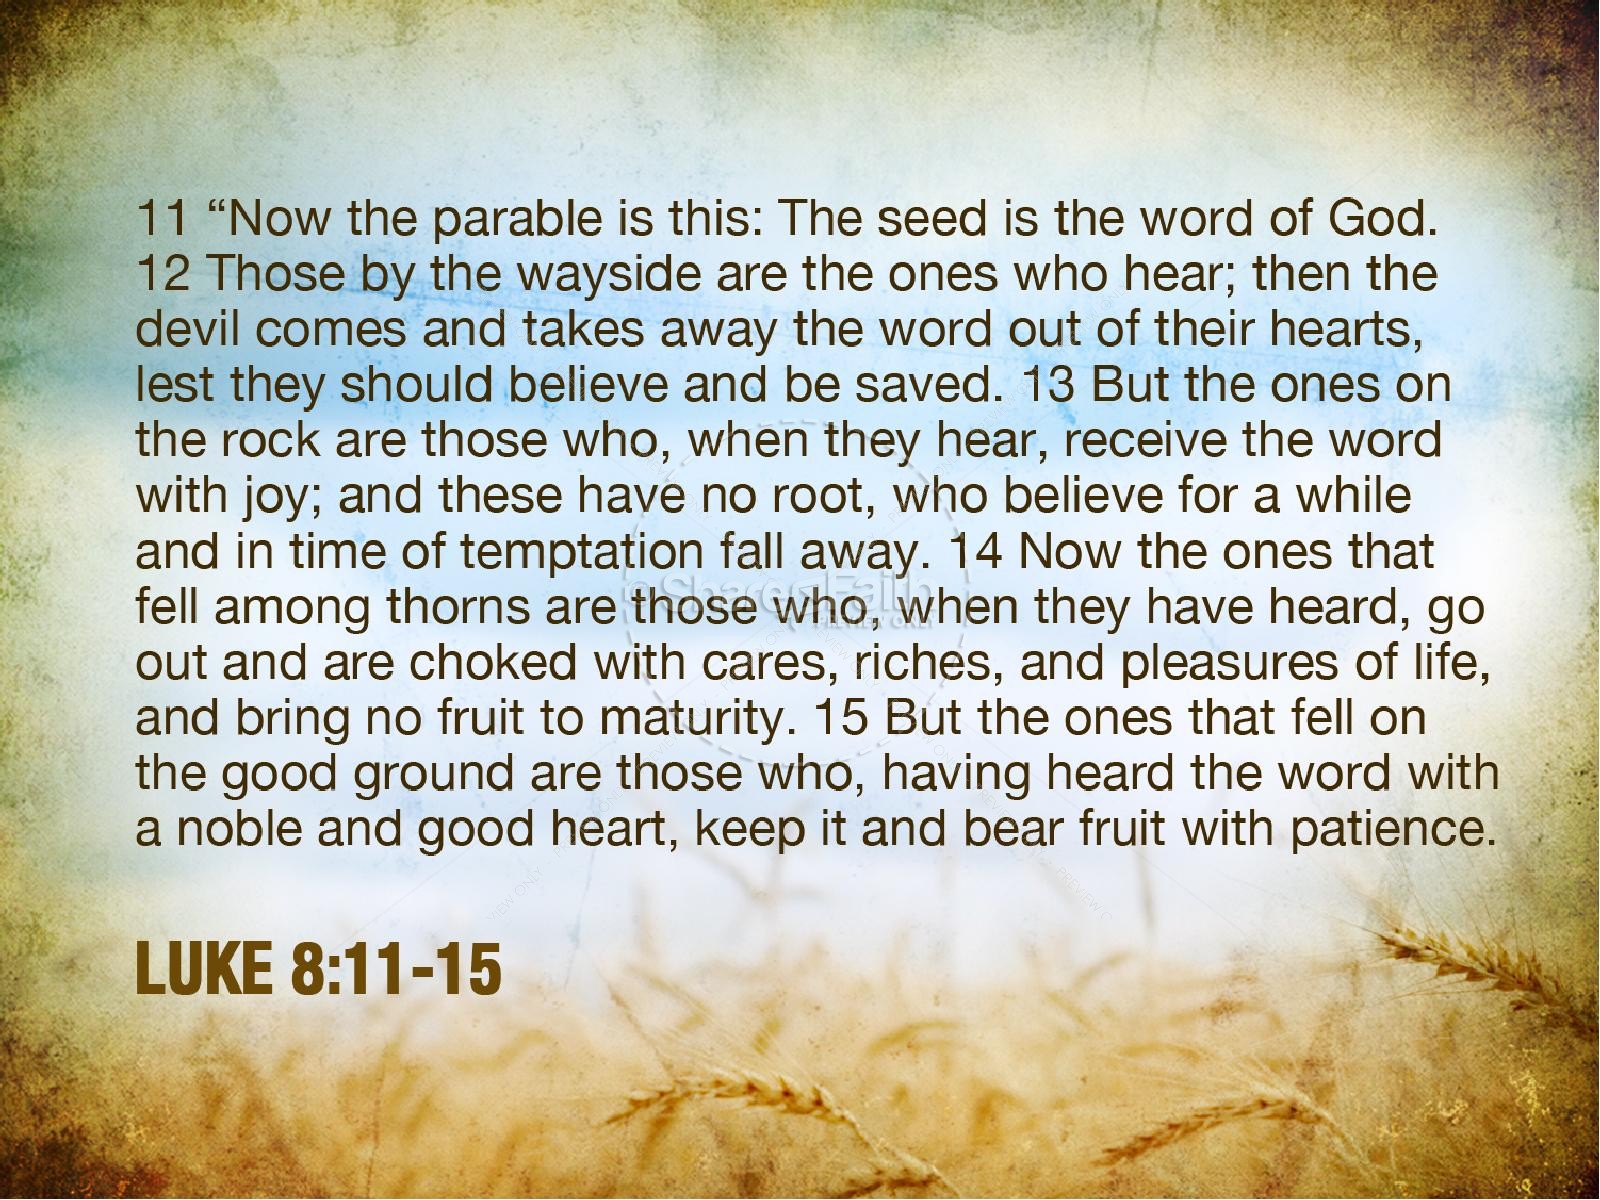 Parable of the Sower Sermon PowerPoint | slide 6